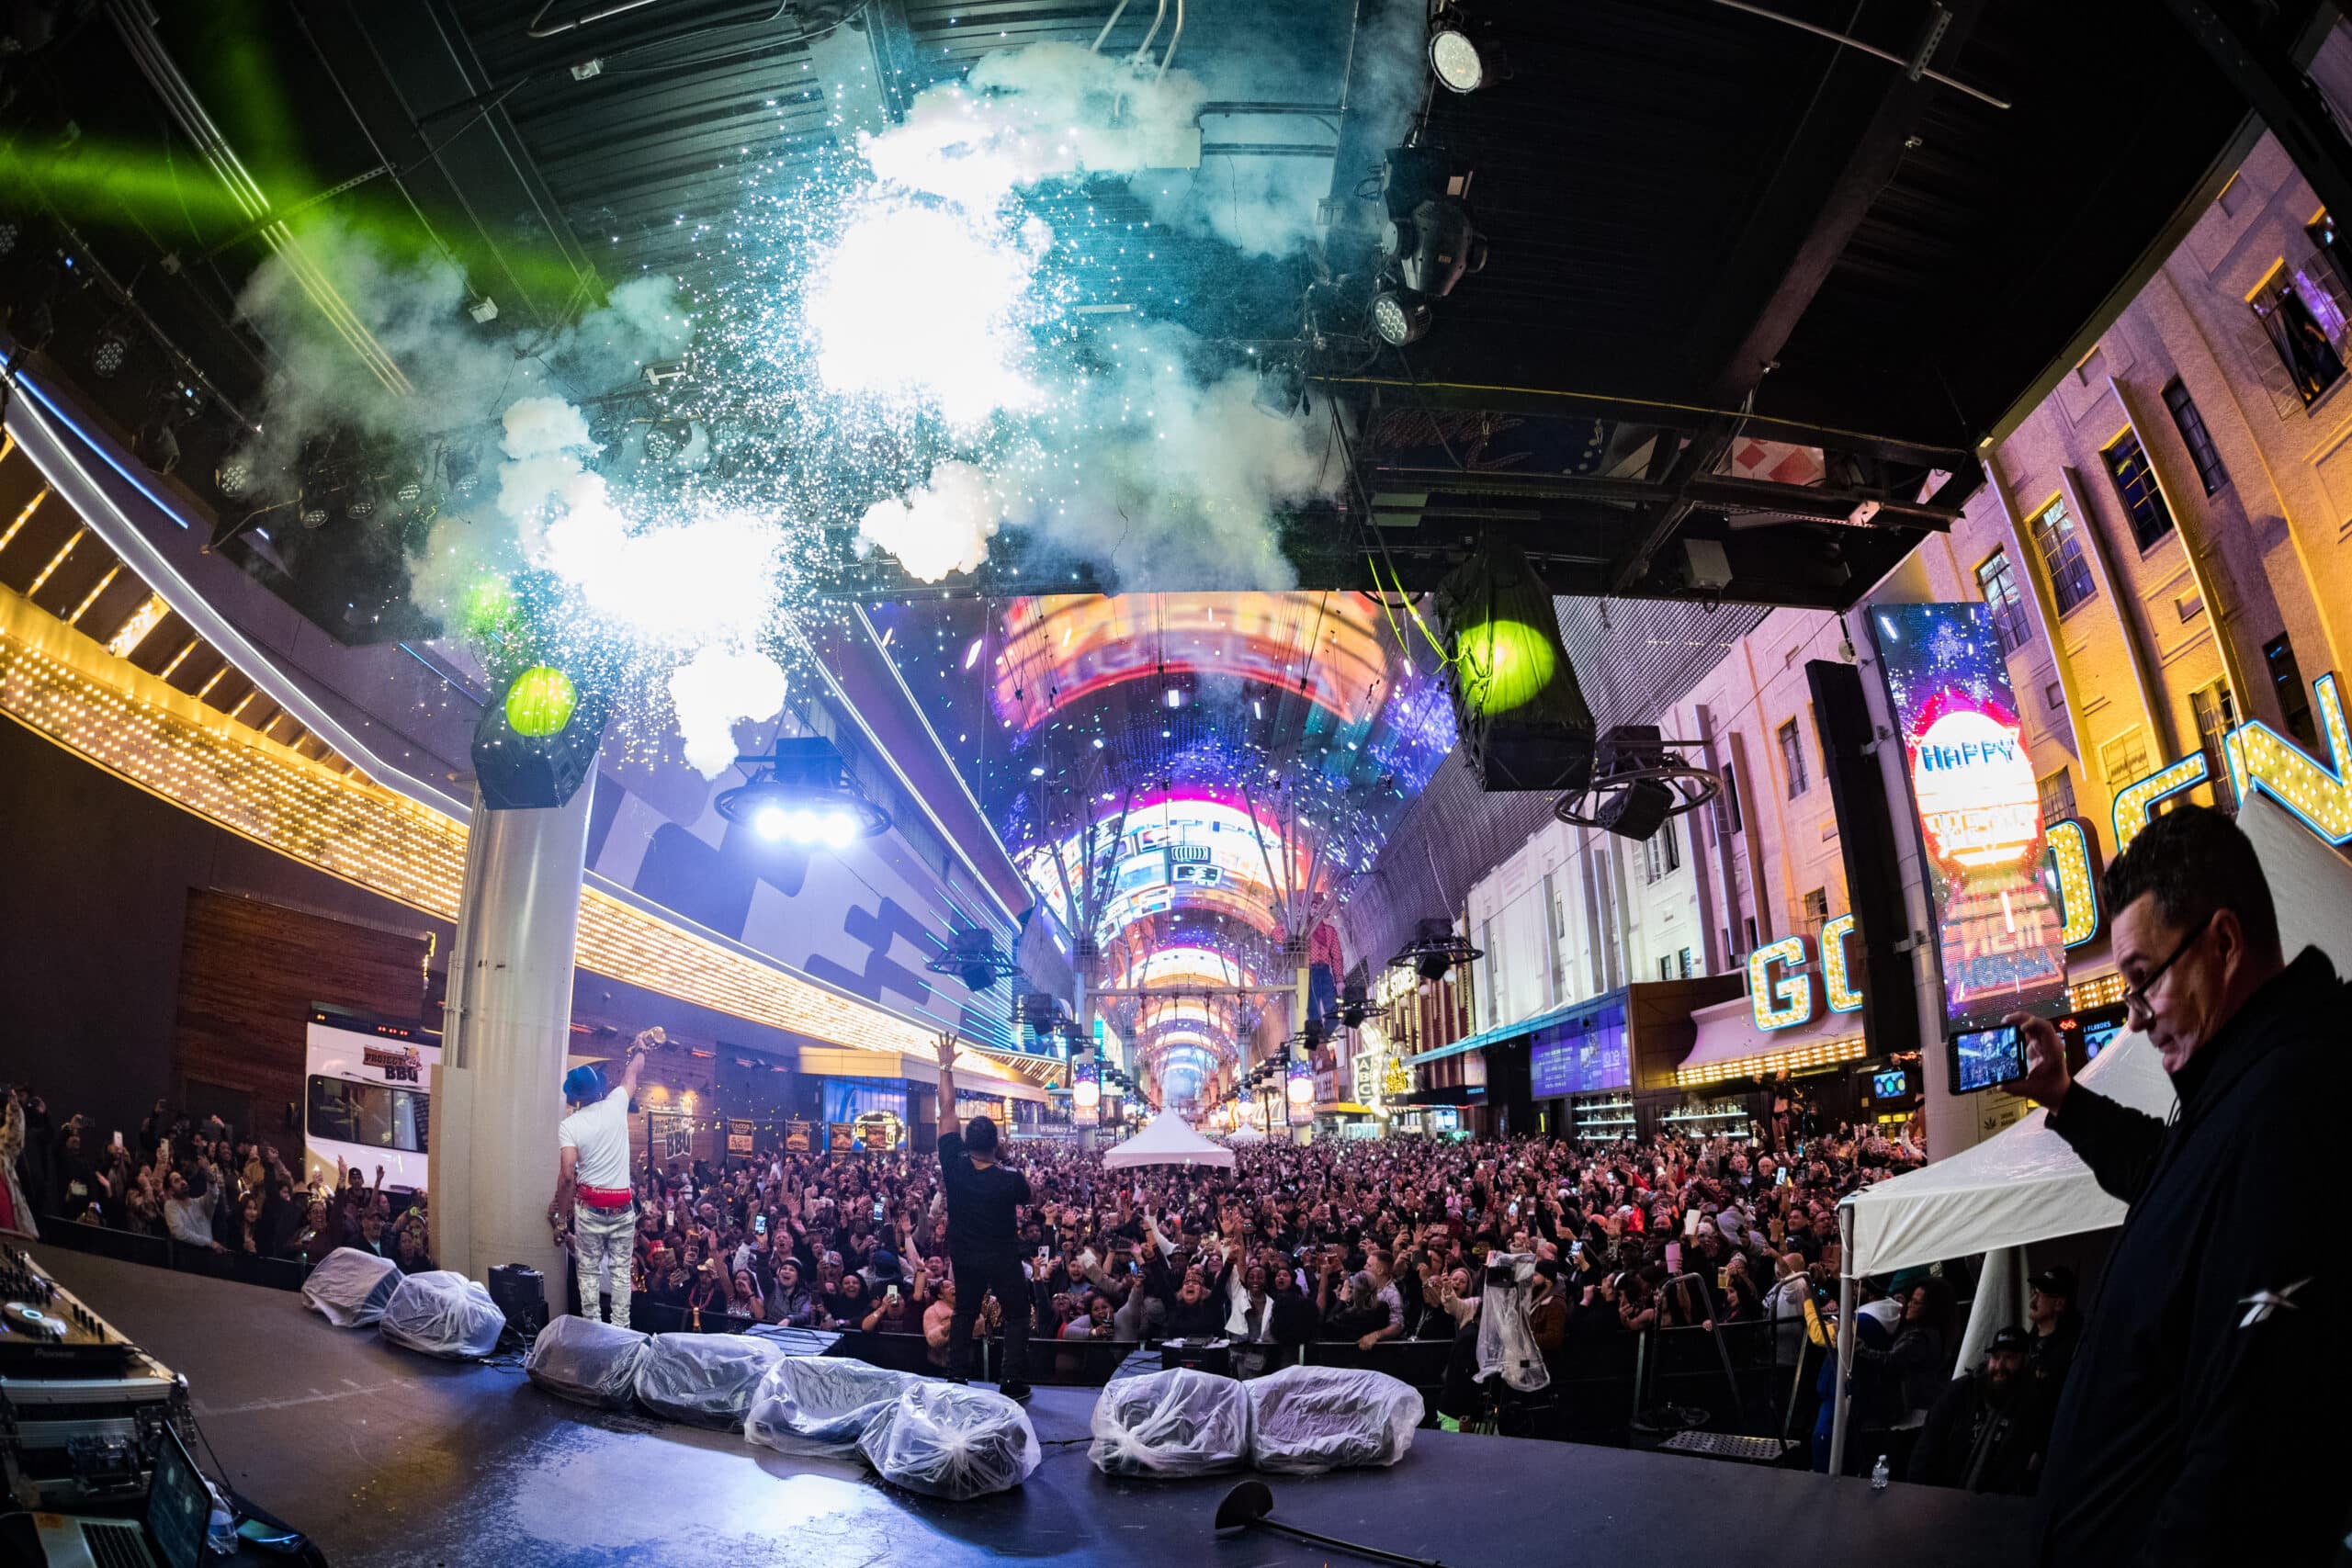 Fremont Street Experience New Year's Eve: No Live Music, But